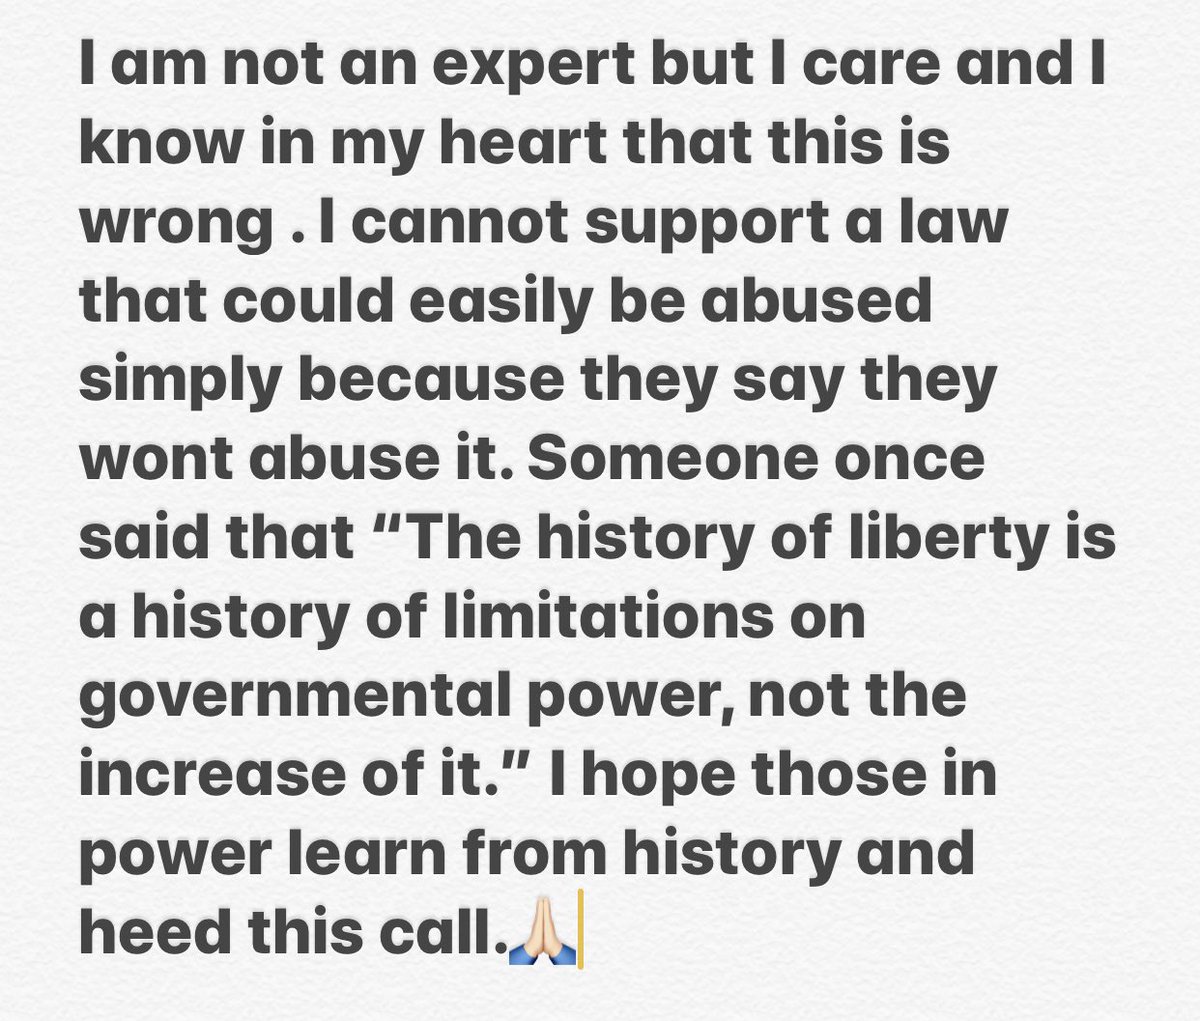 these past few days ive talking to lawyers,human rights activists and people I trust to educate and make me understand better what the #AntiTerrorismBill stands for and this is what I would like to share .